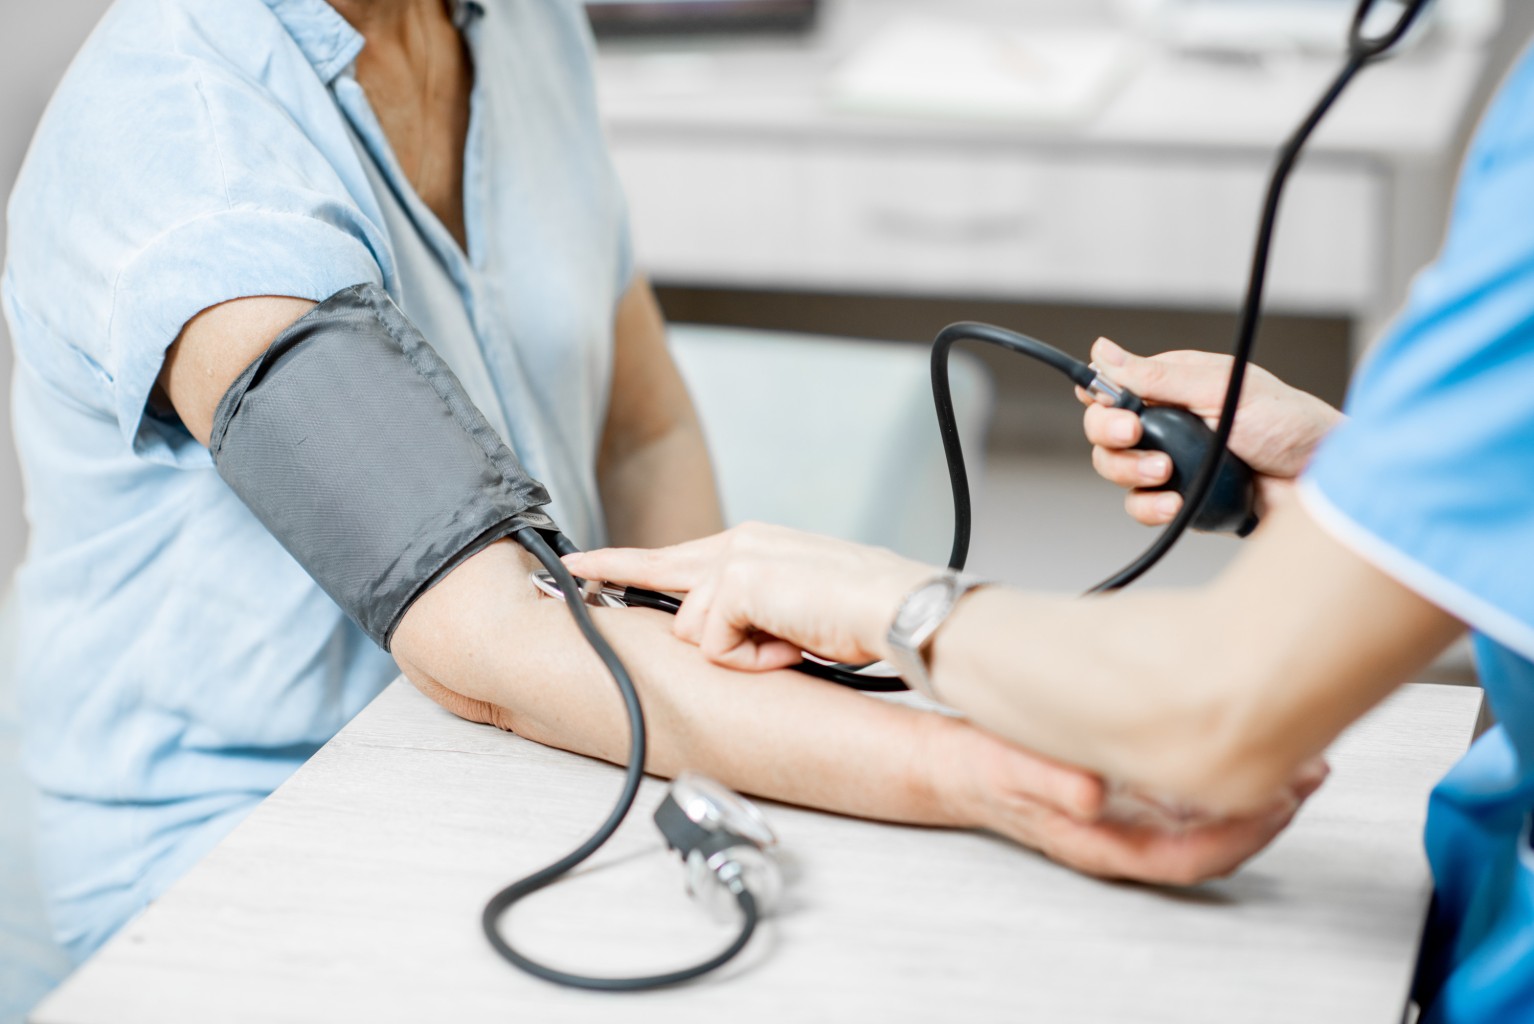 The importance of blood pressure checks